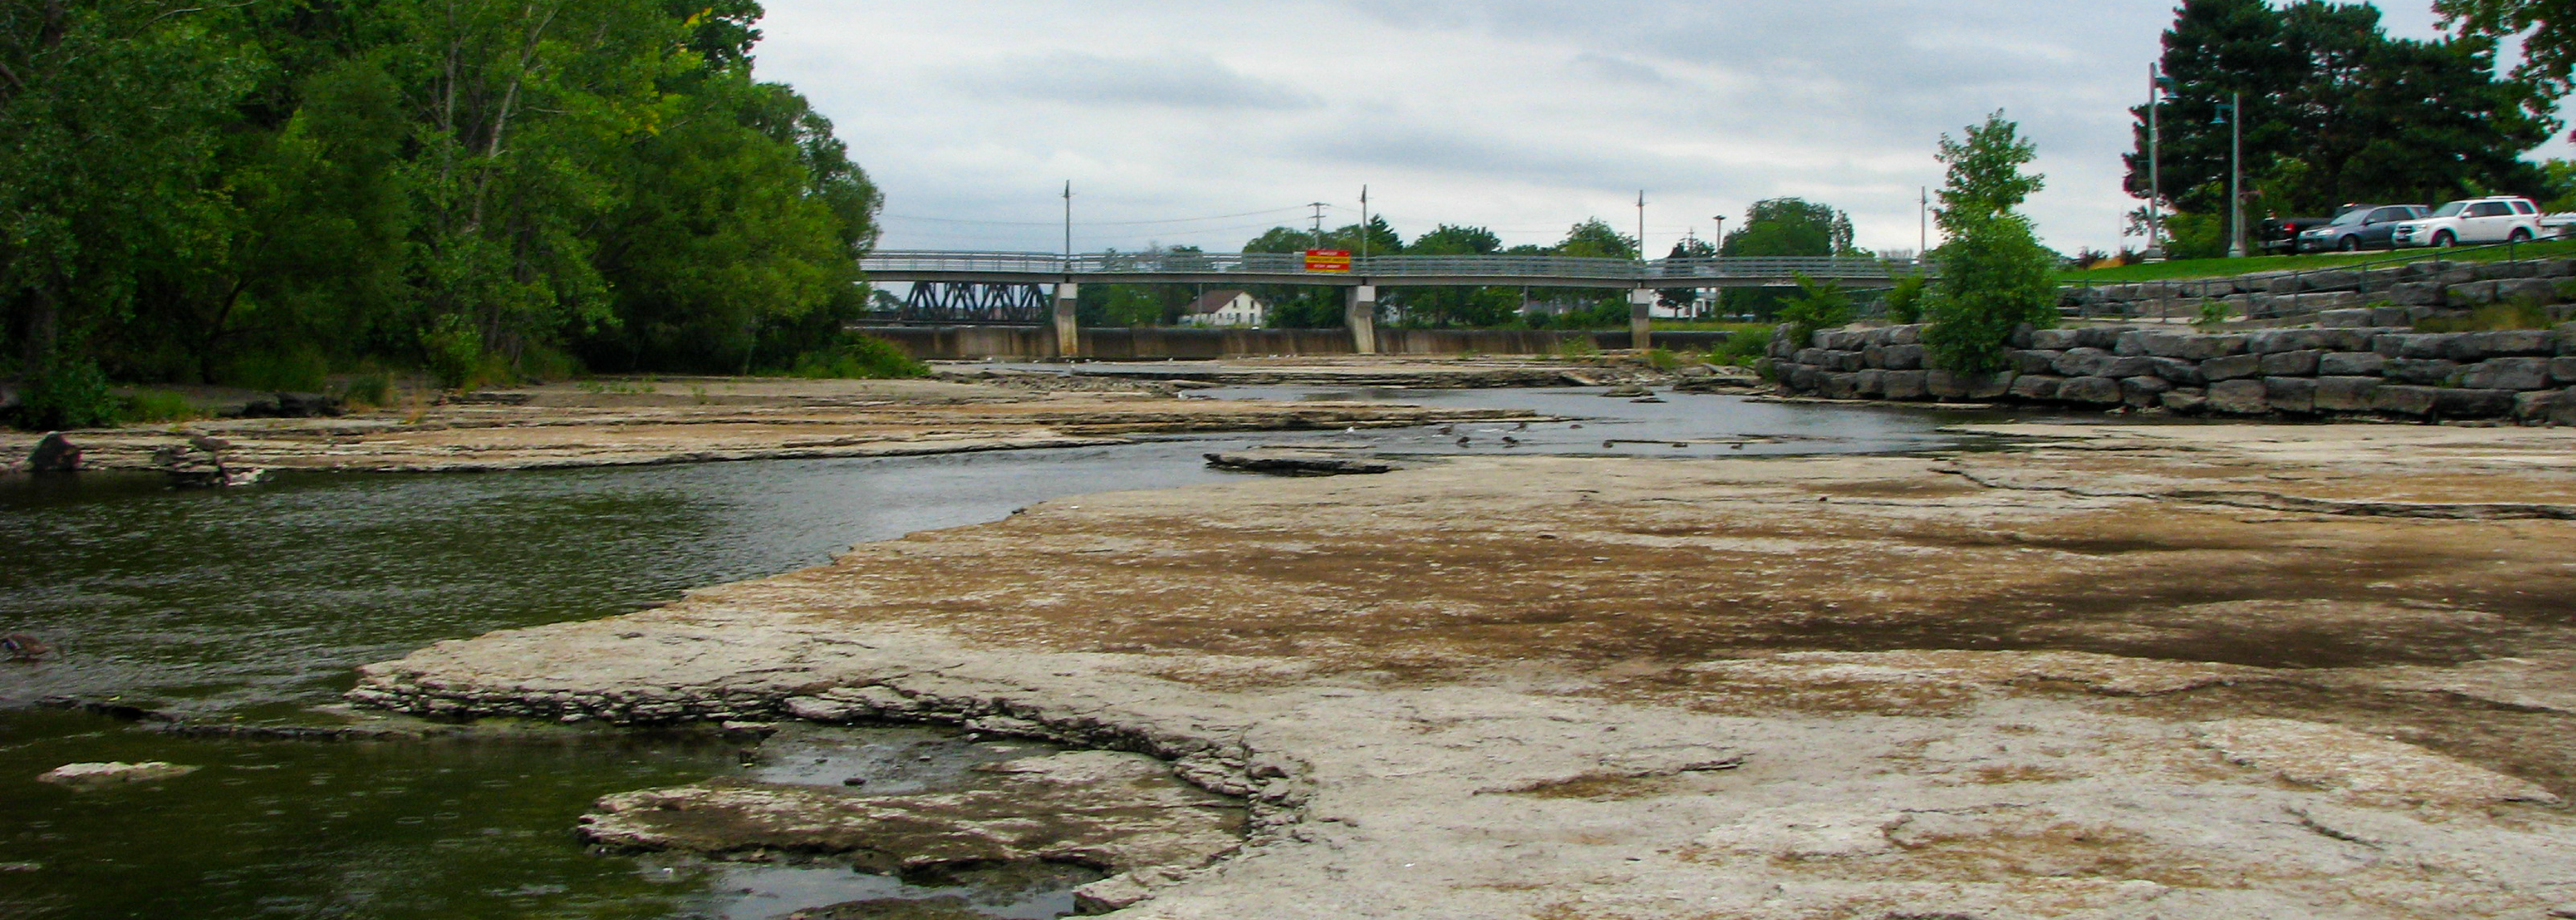 Exposed river bed due to drought conditions 